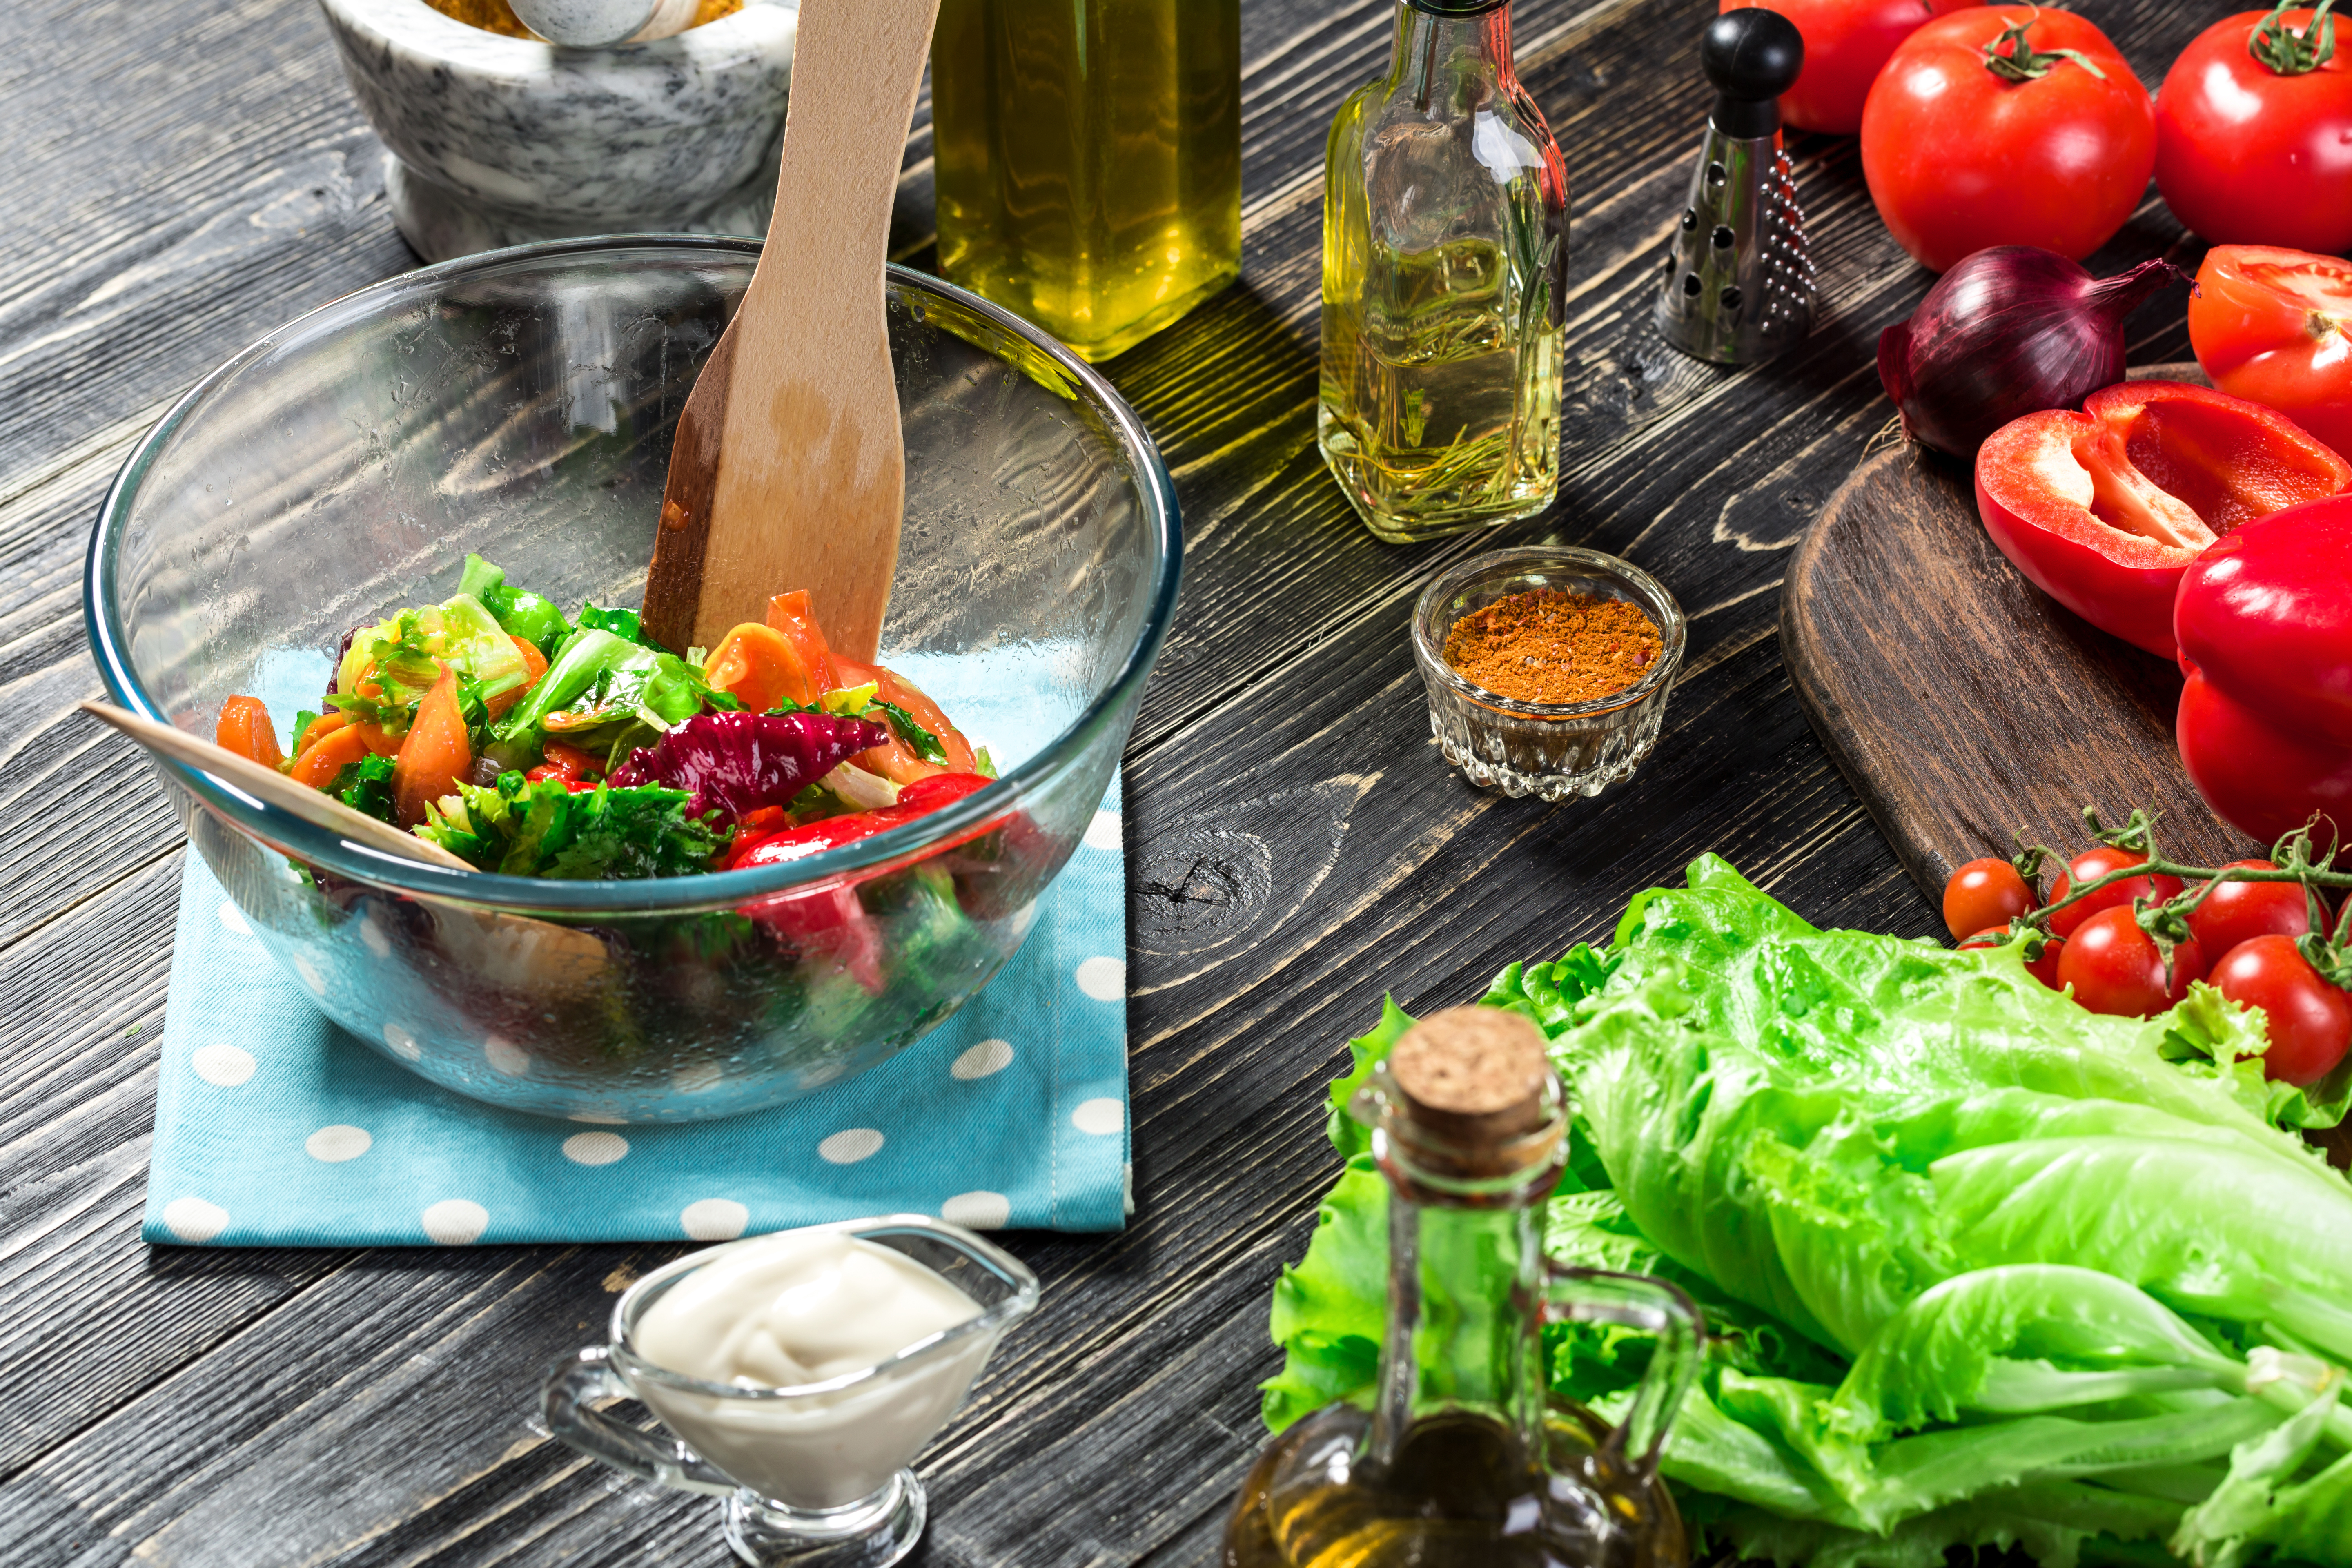 Preparing salad with fresh vegetables and olive oil.